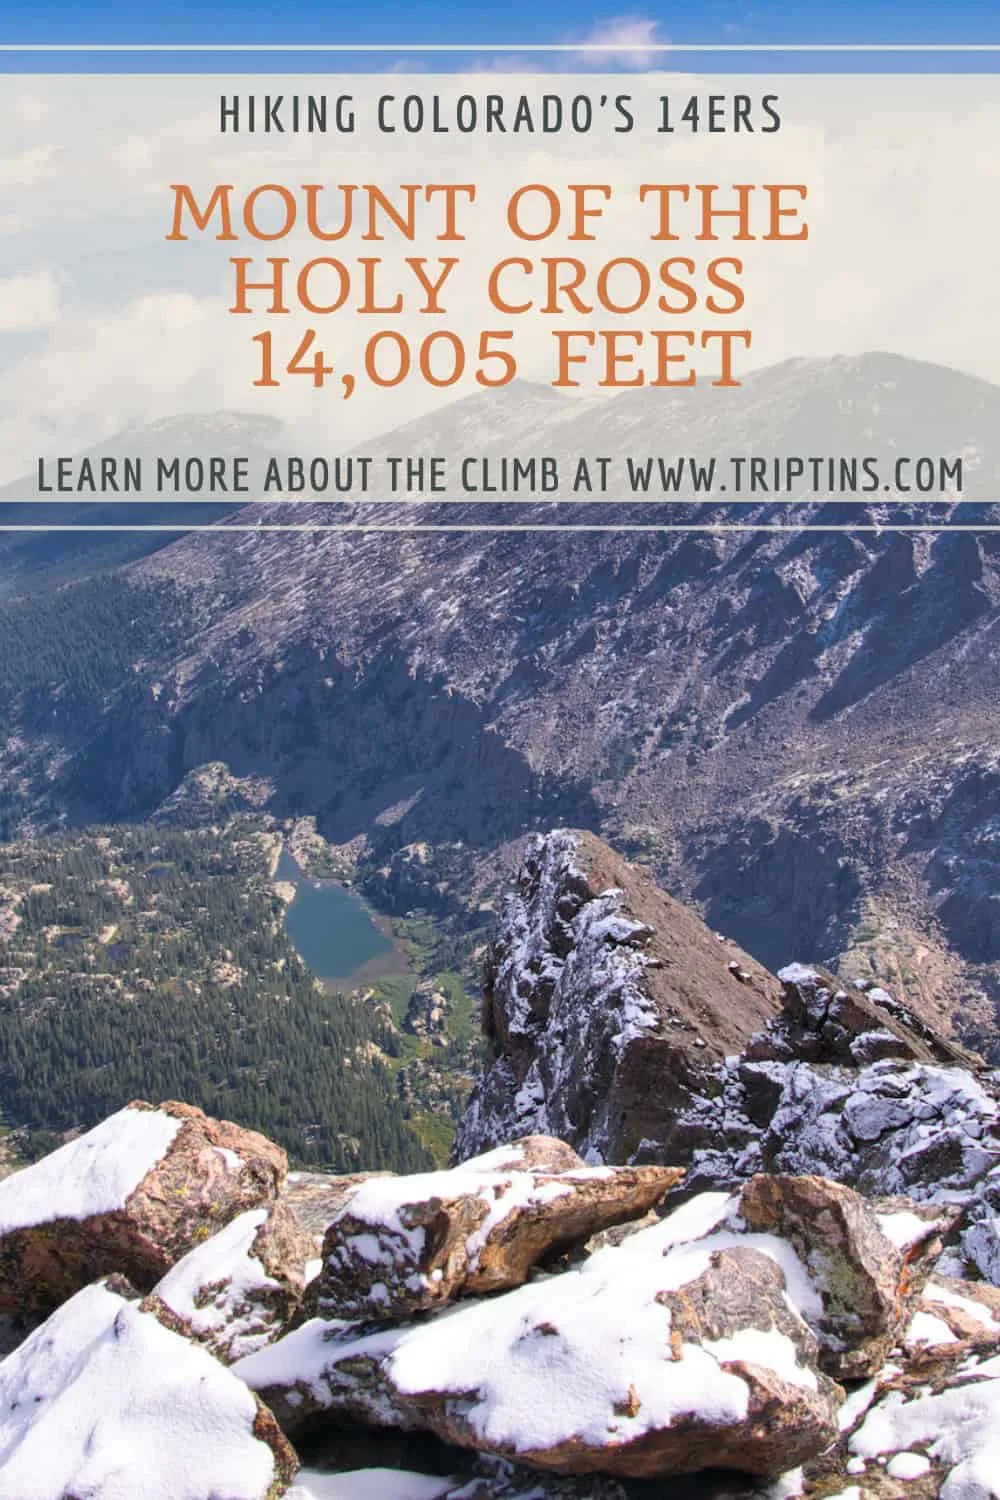 Mount of the Holy Cross in Colorado